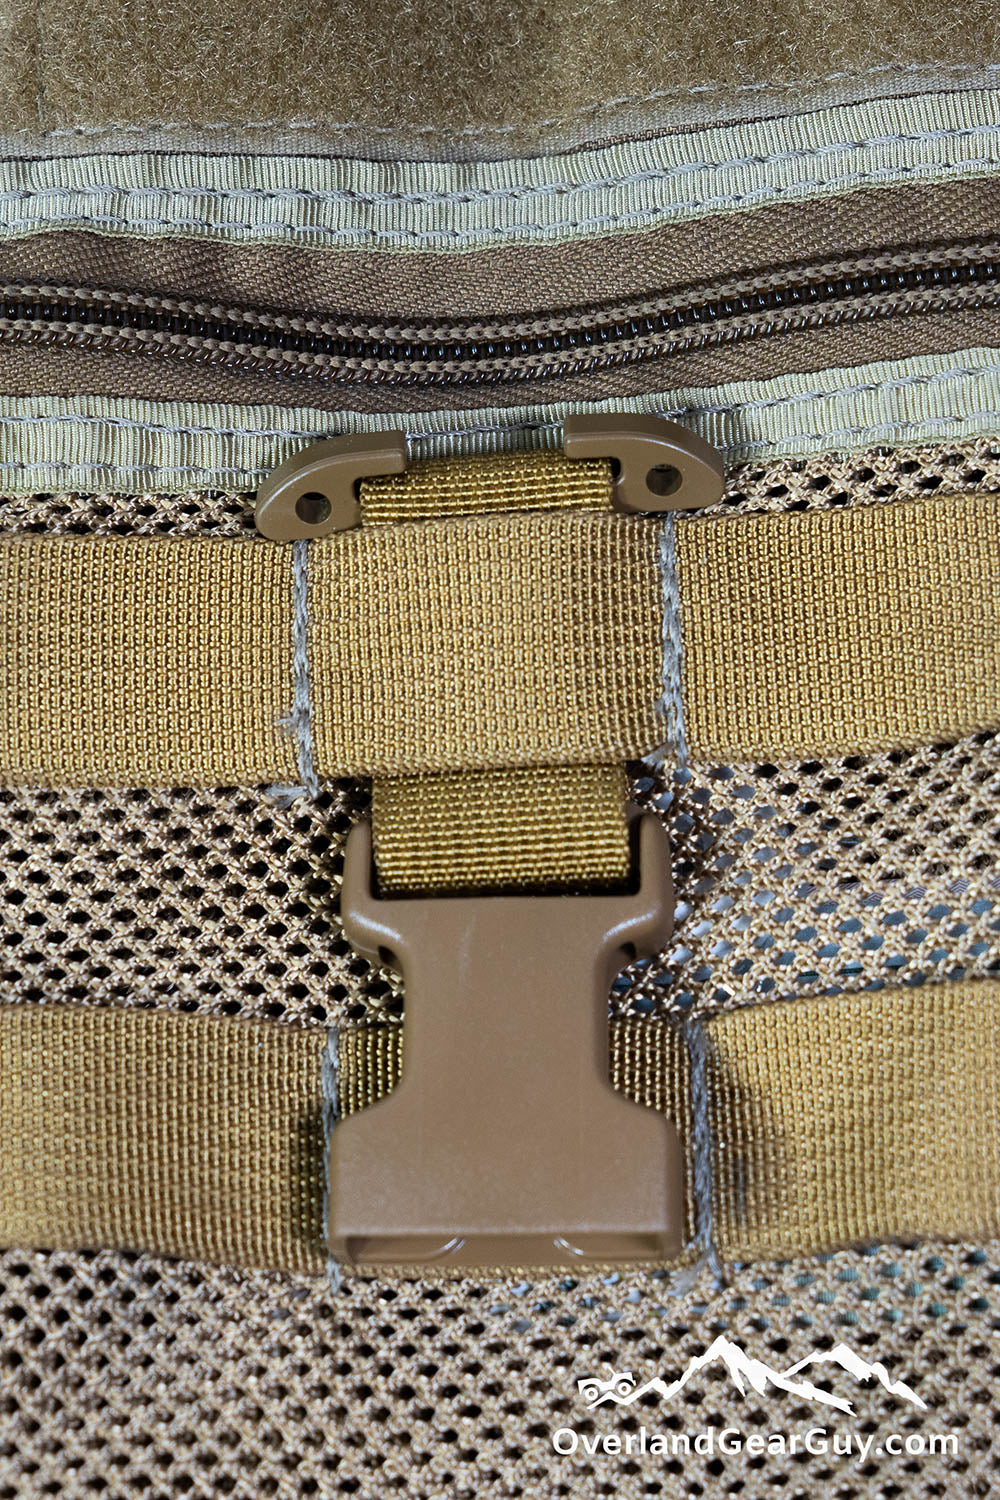 T-Ring adapter for PALS / MOLLE – Overland Gear Guy